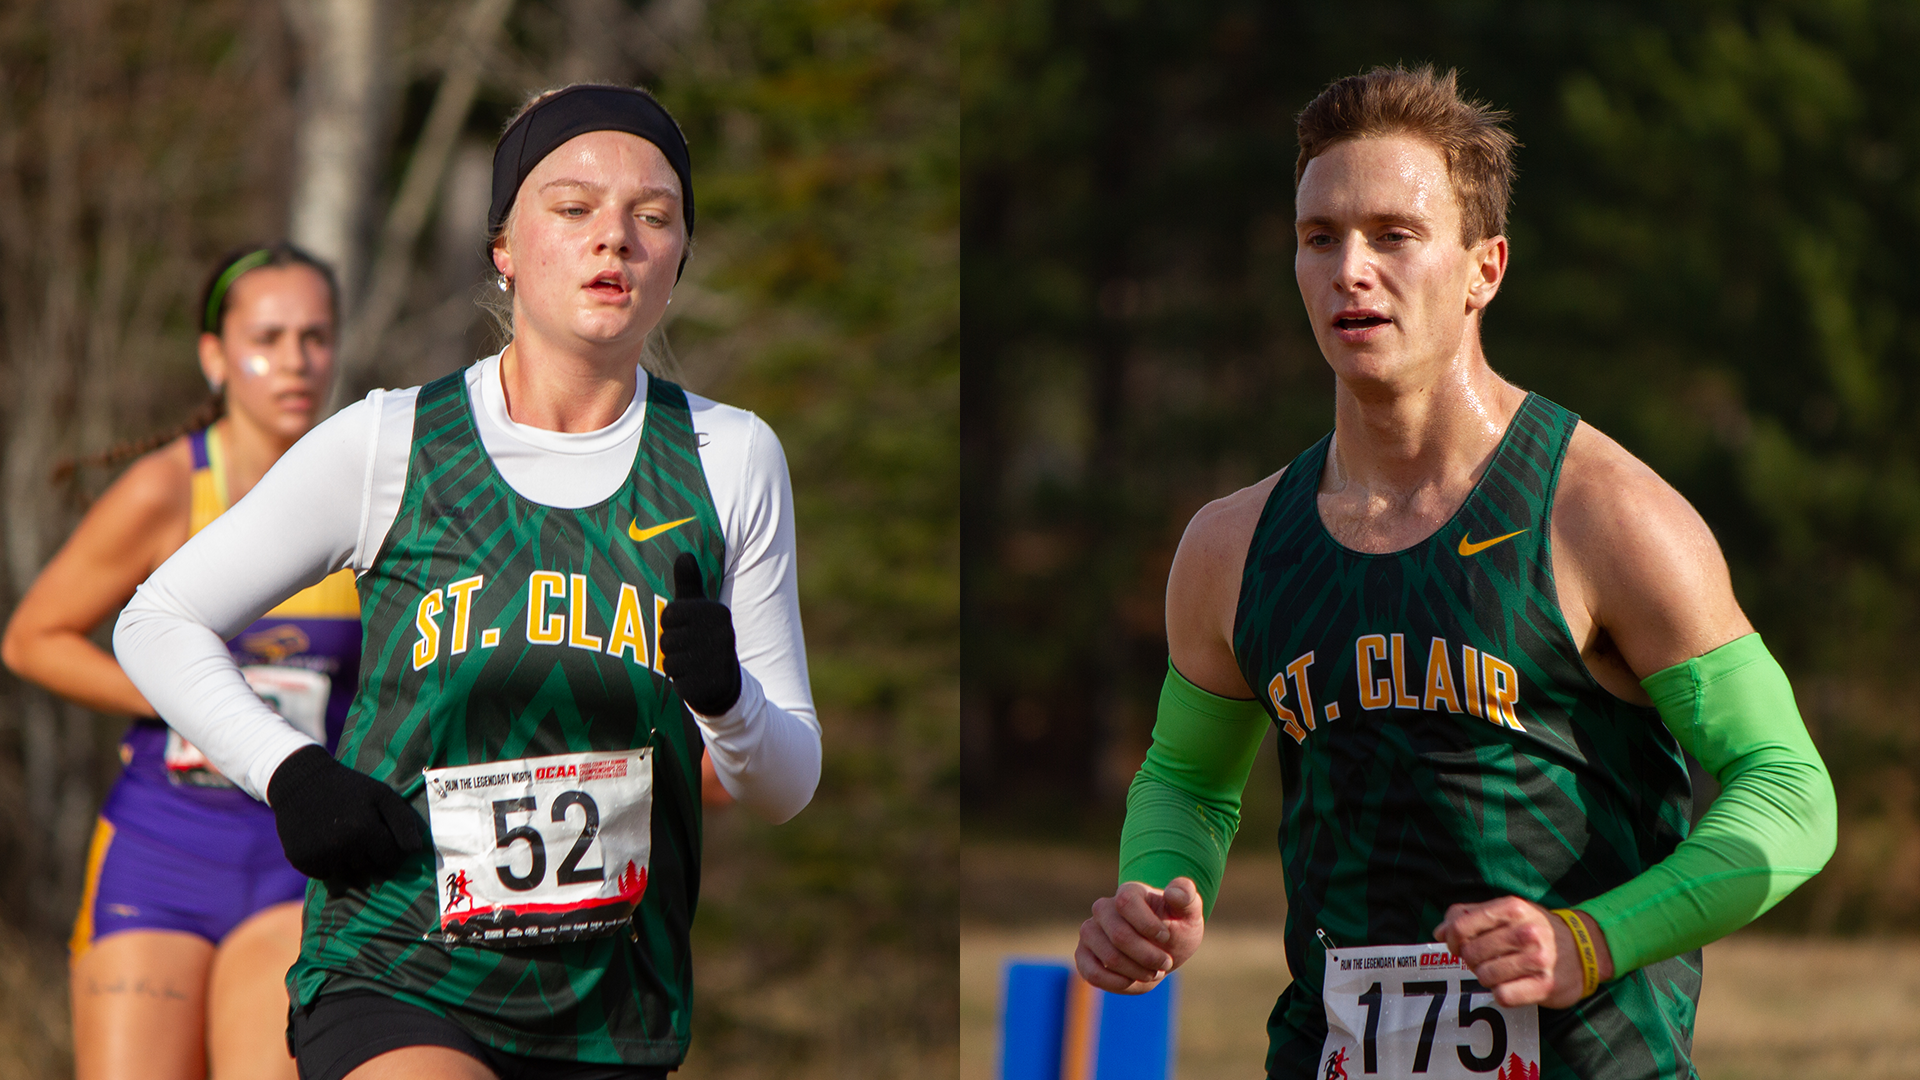 St. Clair Cross Country in Alberta Again for Nationals